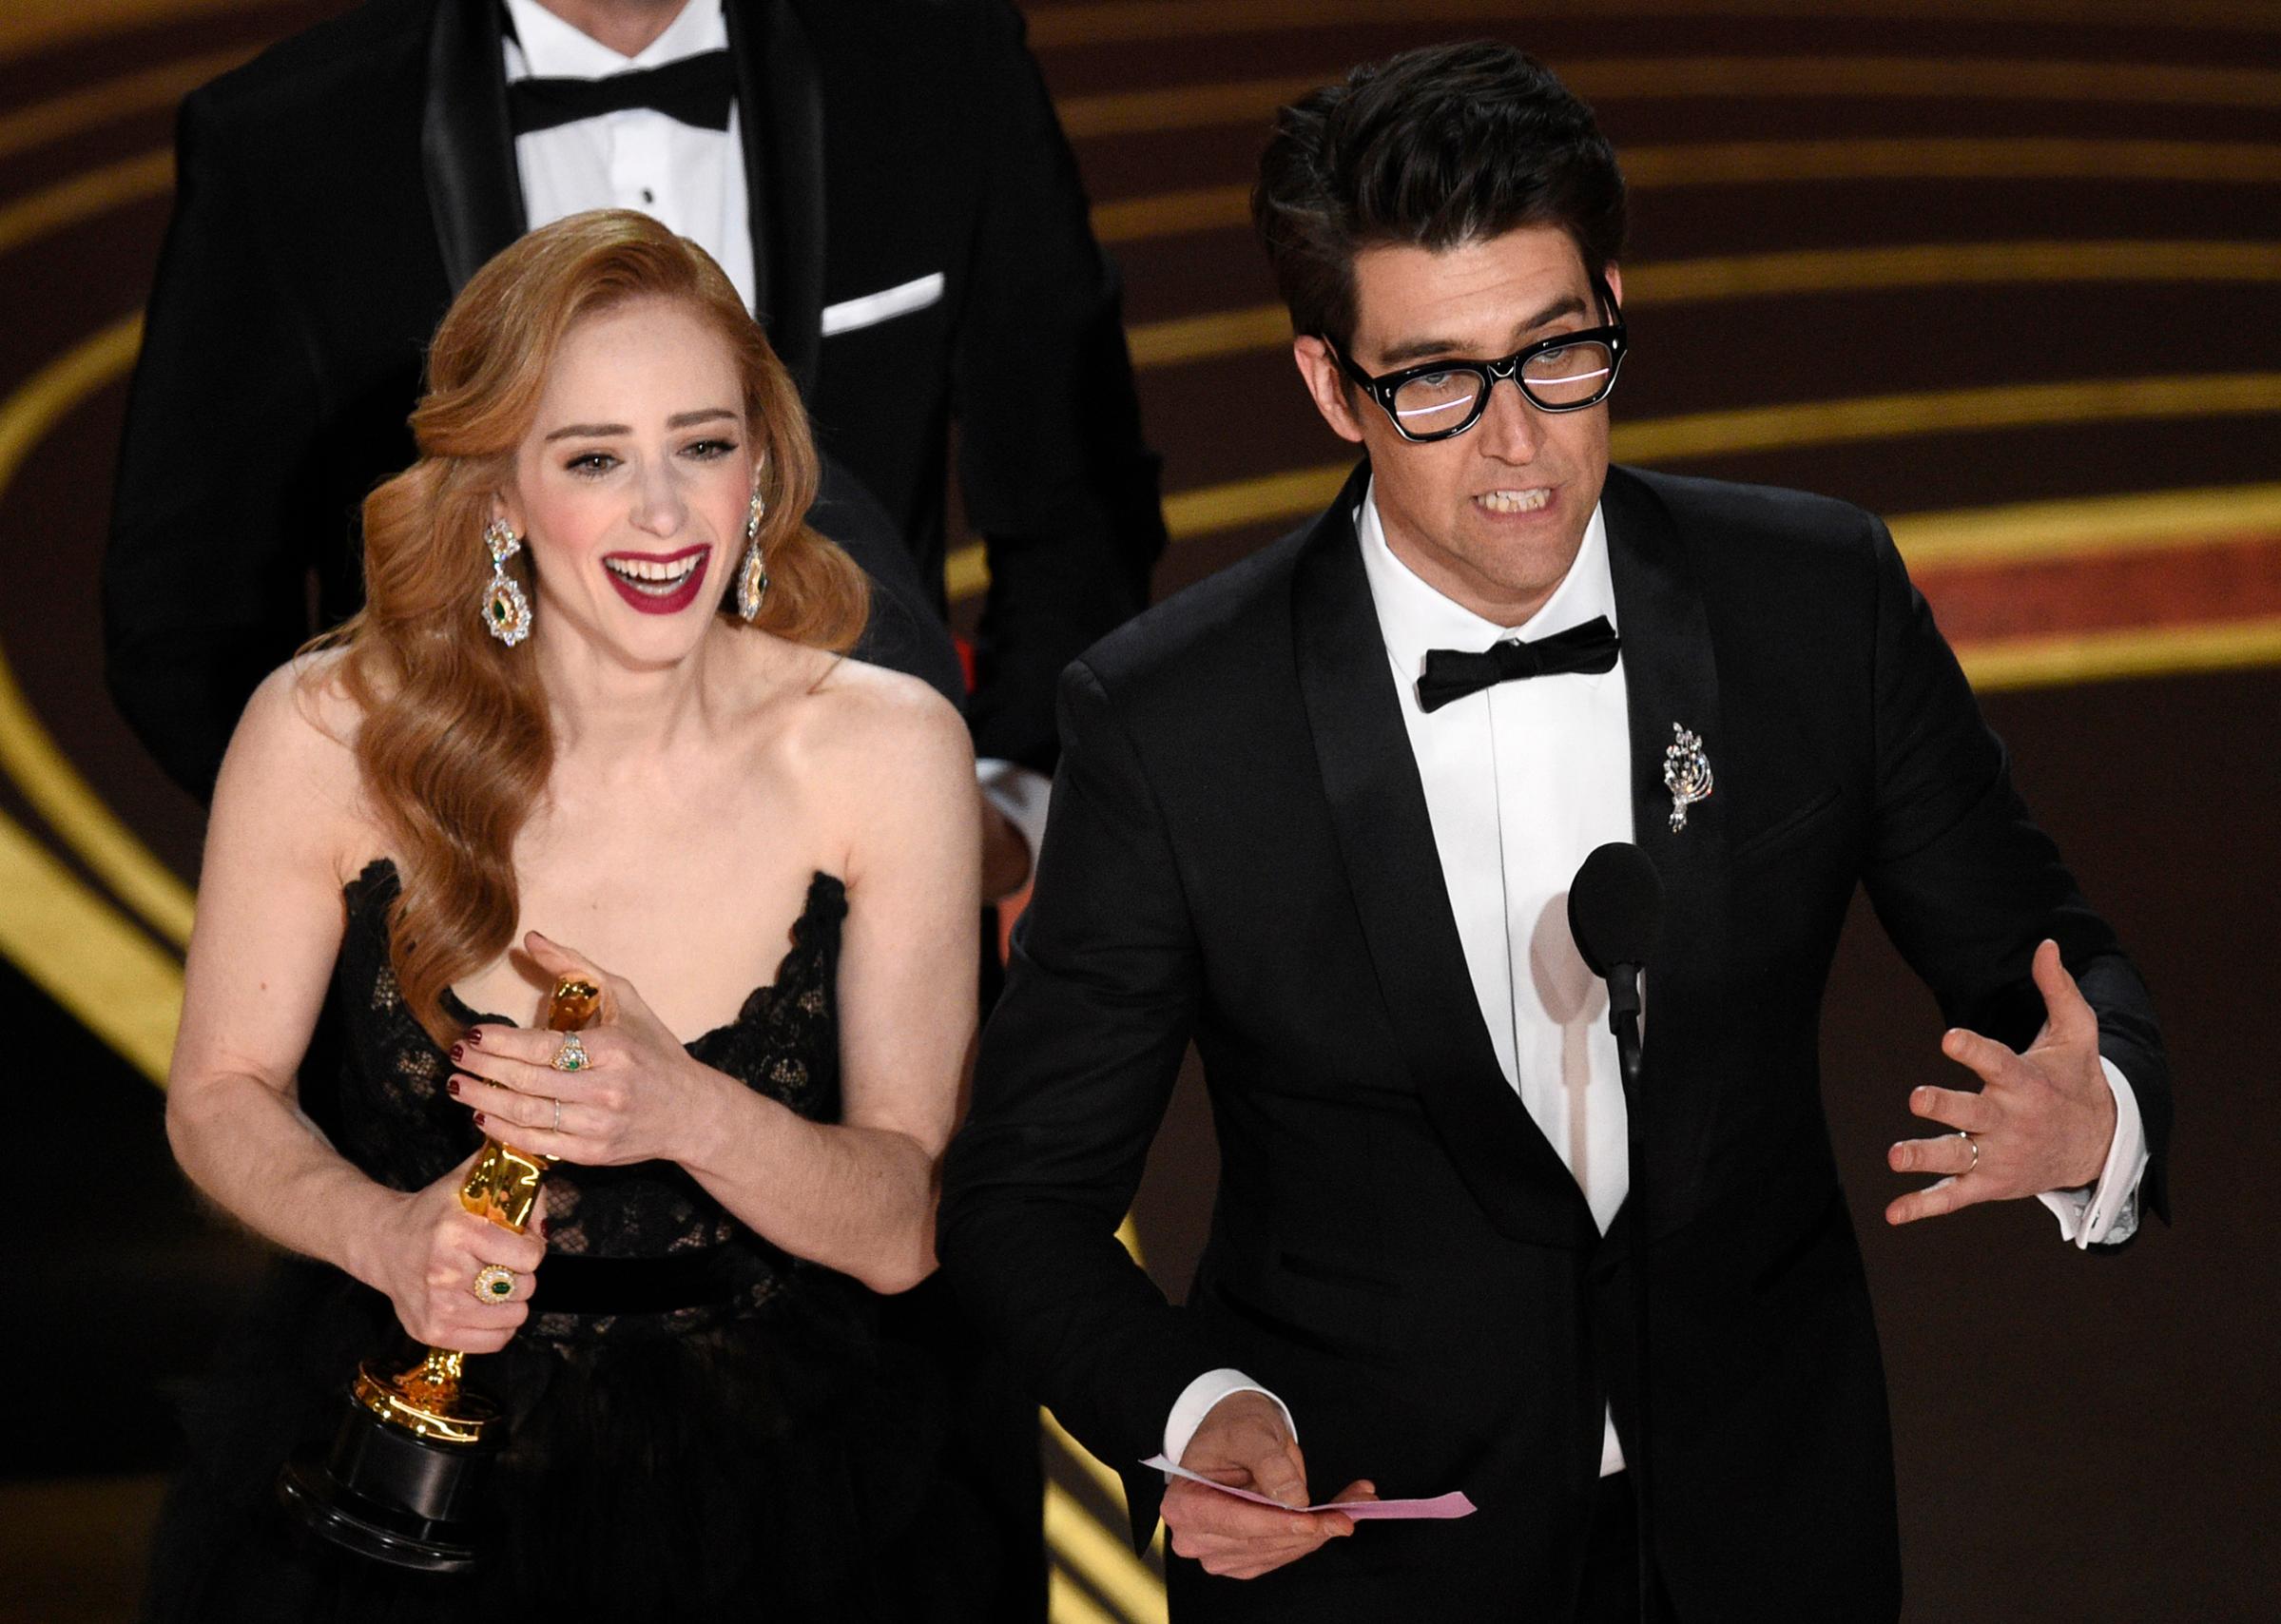 Guy Nattiv, right, and Jaime Ray Newman accept the award for best live action short film for "Skin" at the Oscars on Feb. 24, 2019.